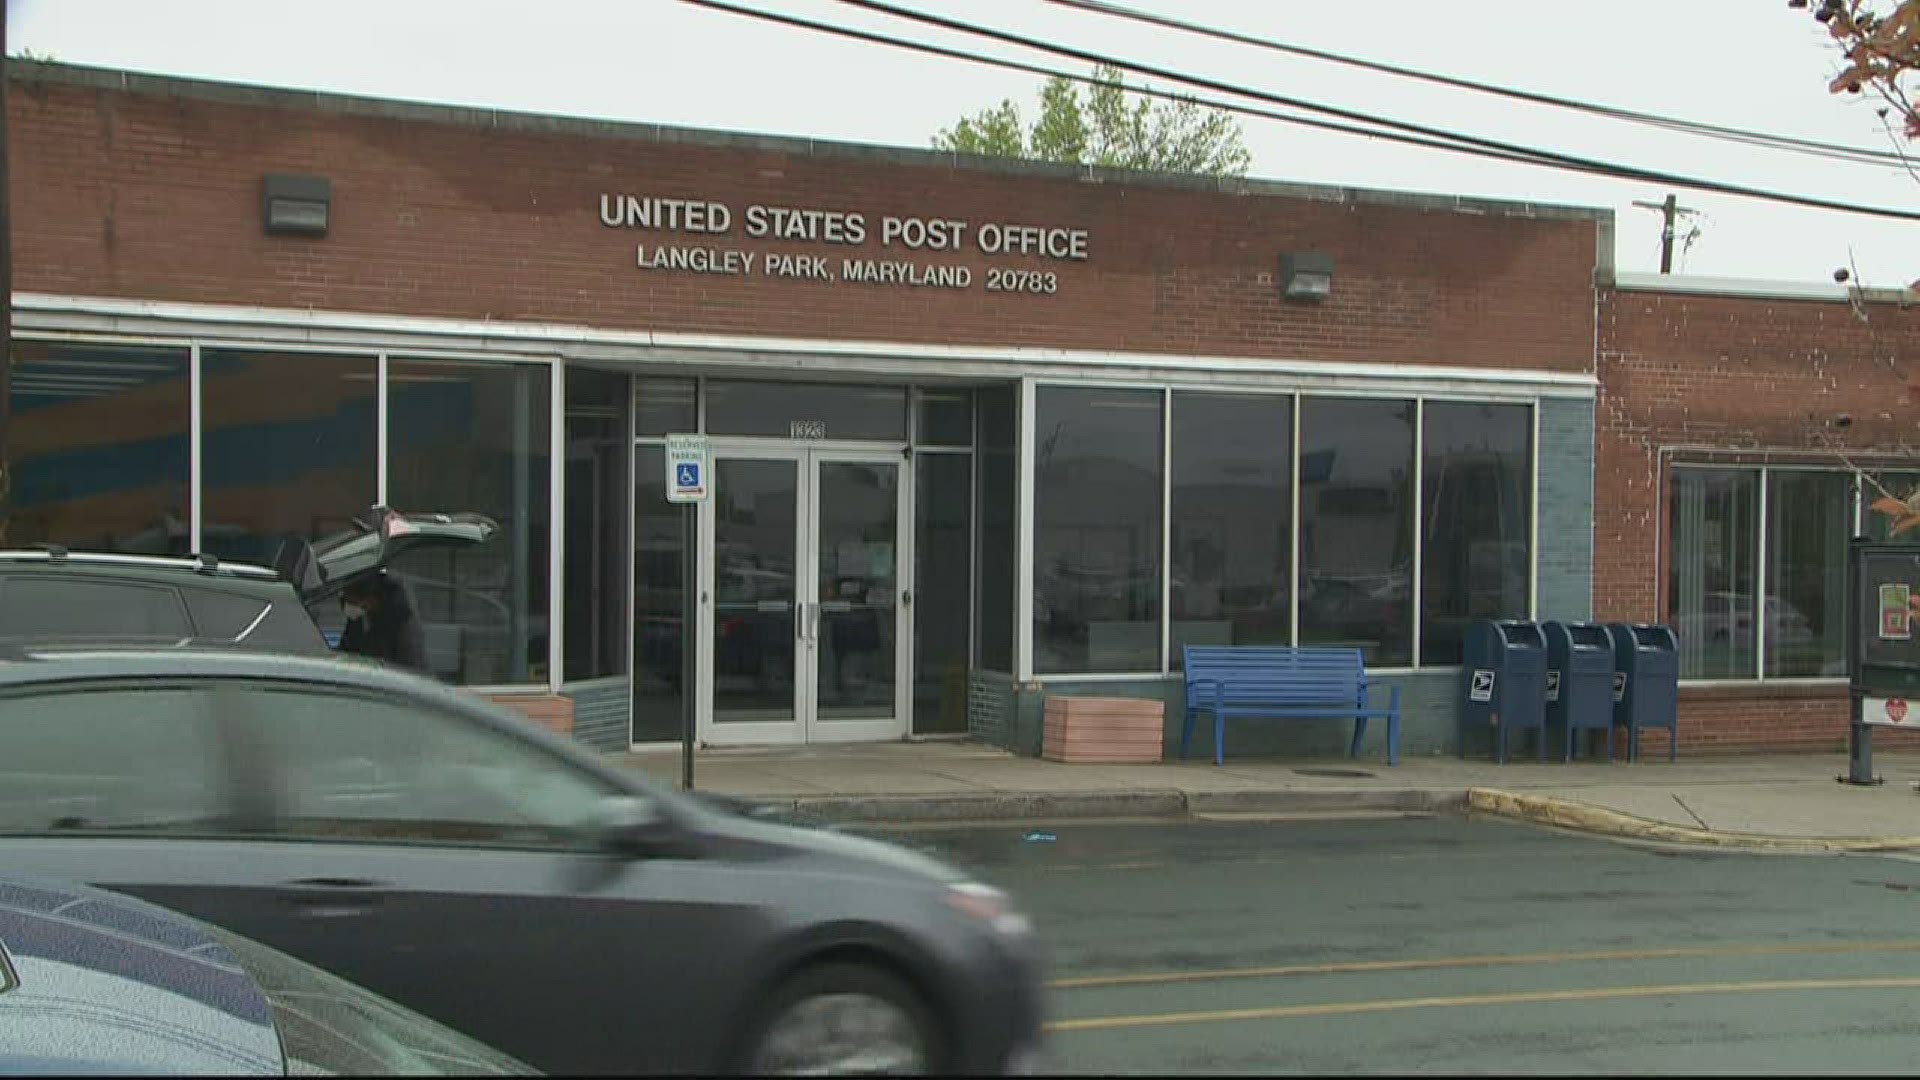 Post offices fight threat of COVID-19 era | www.strongerinc.org